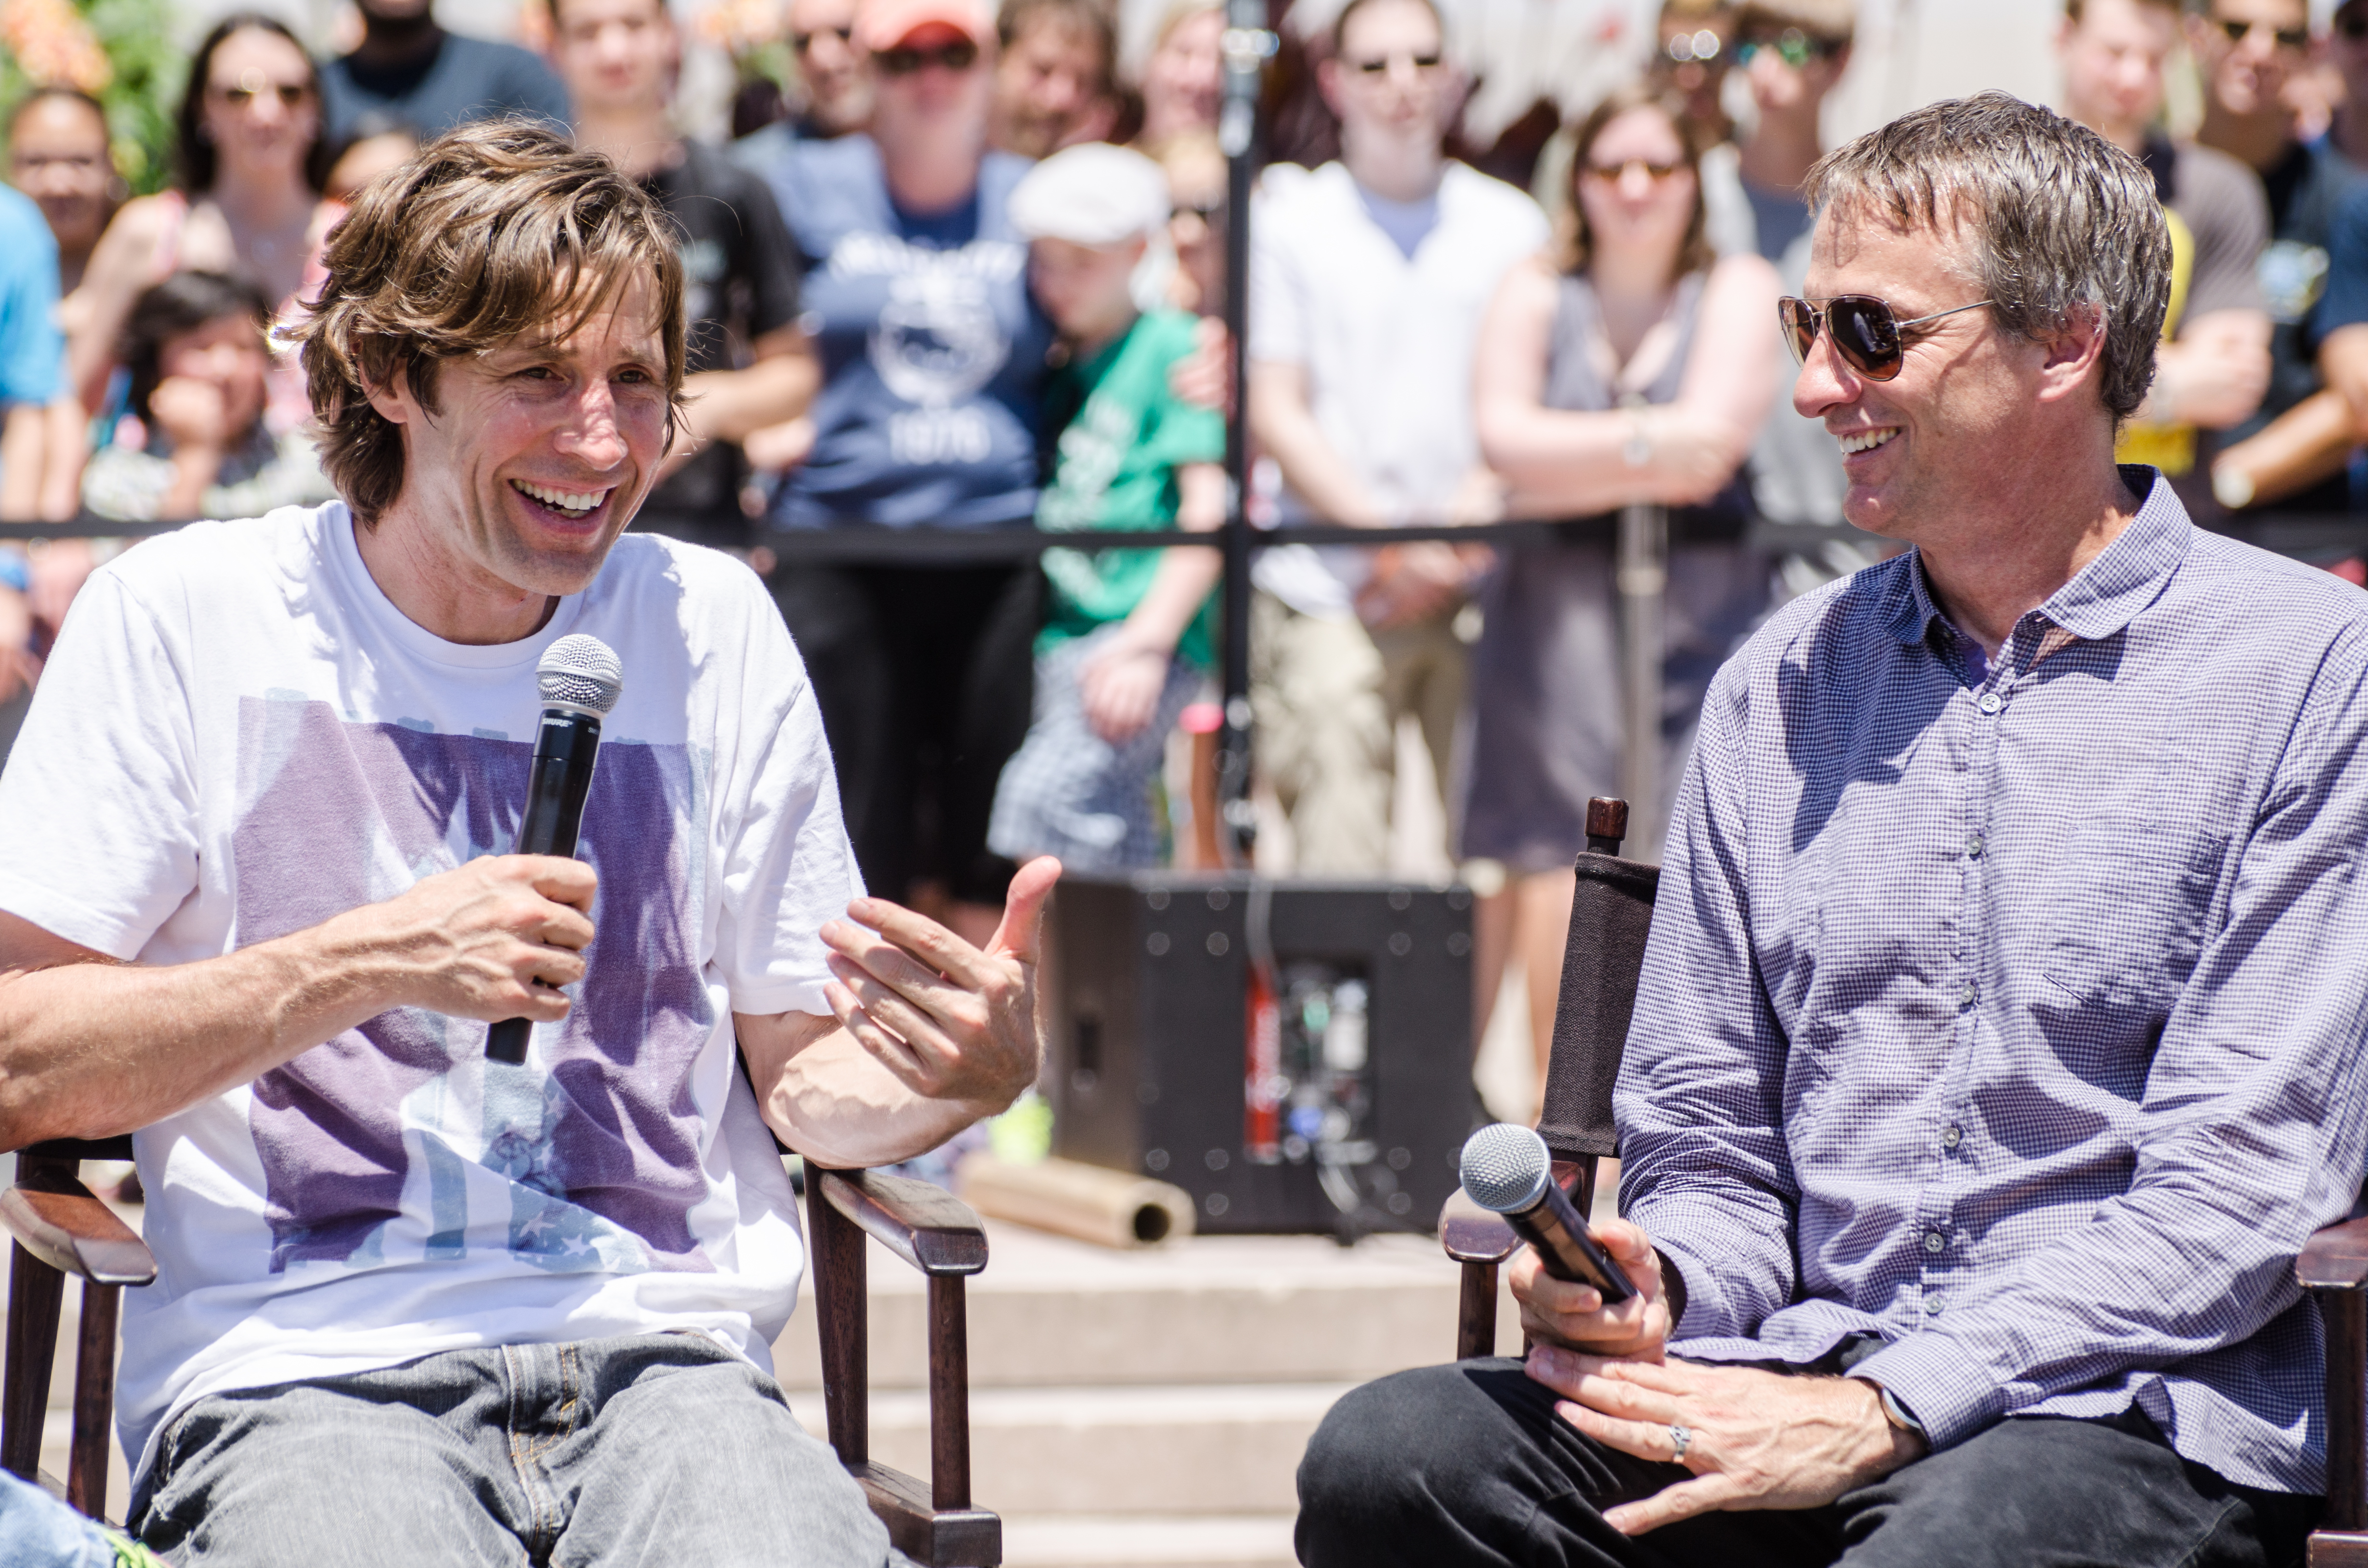 Rodney Mullen and Tony Hawk talk about their inventive process during one of our panels.